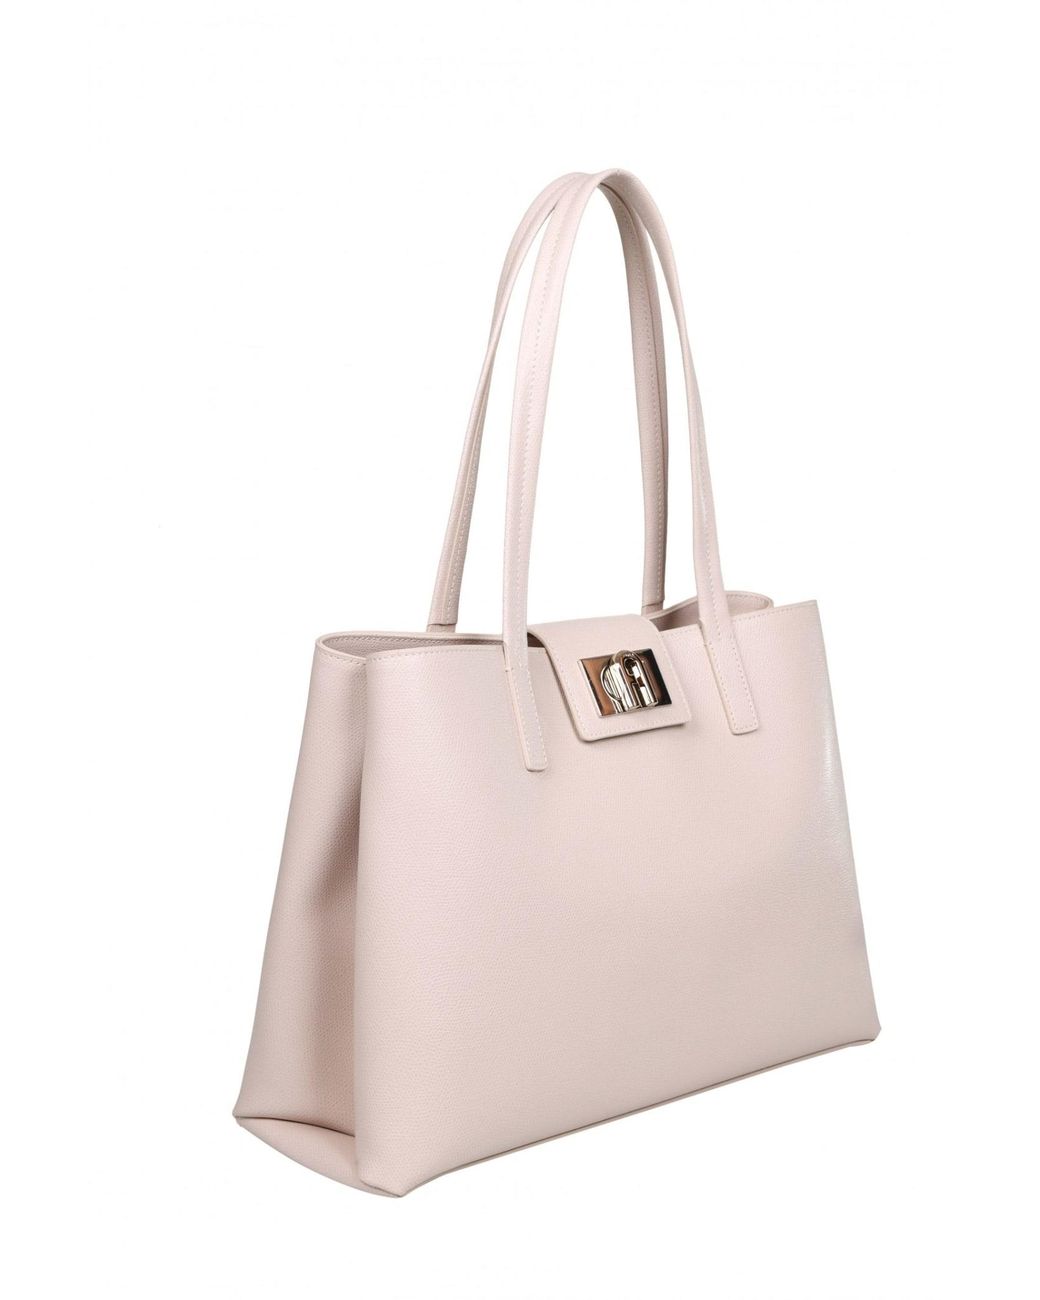 Furla Shopping 1927 L Ballerina Leather Tote in Pink | Lyst